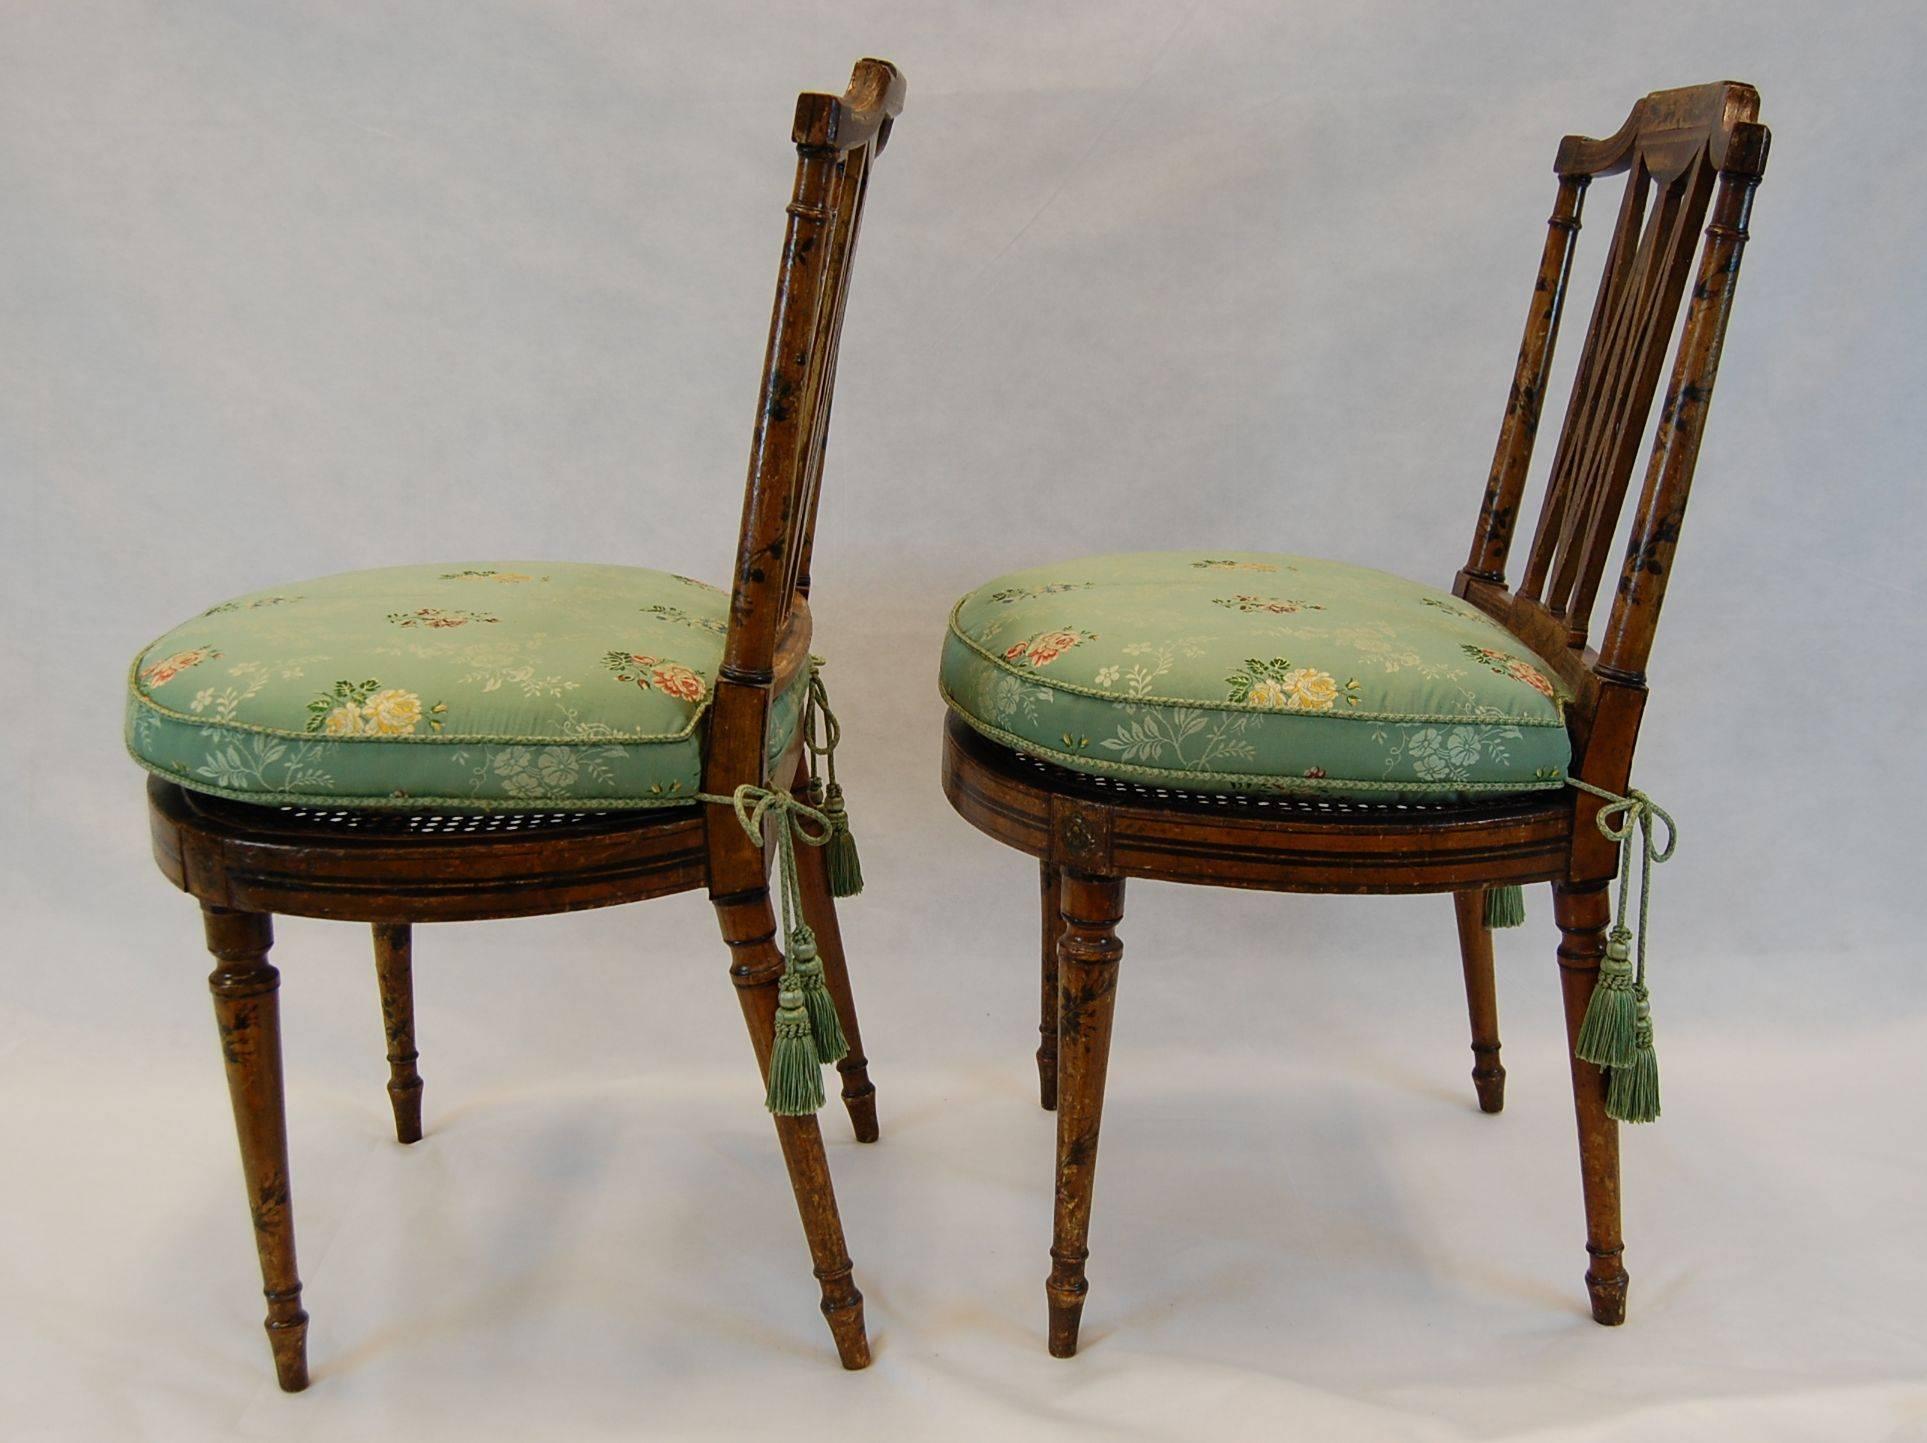 Pair of Early 19th Century English Chairs with Cane Seats, circa 1800 1